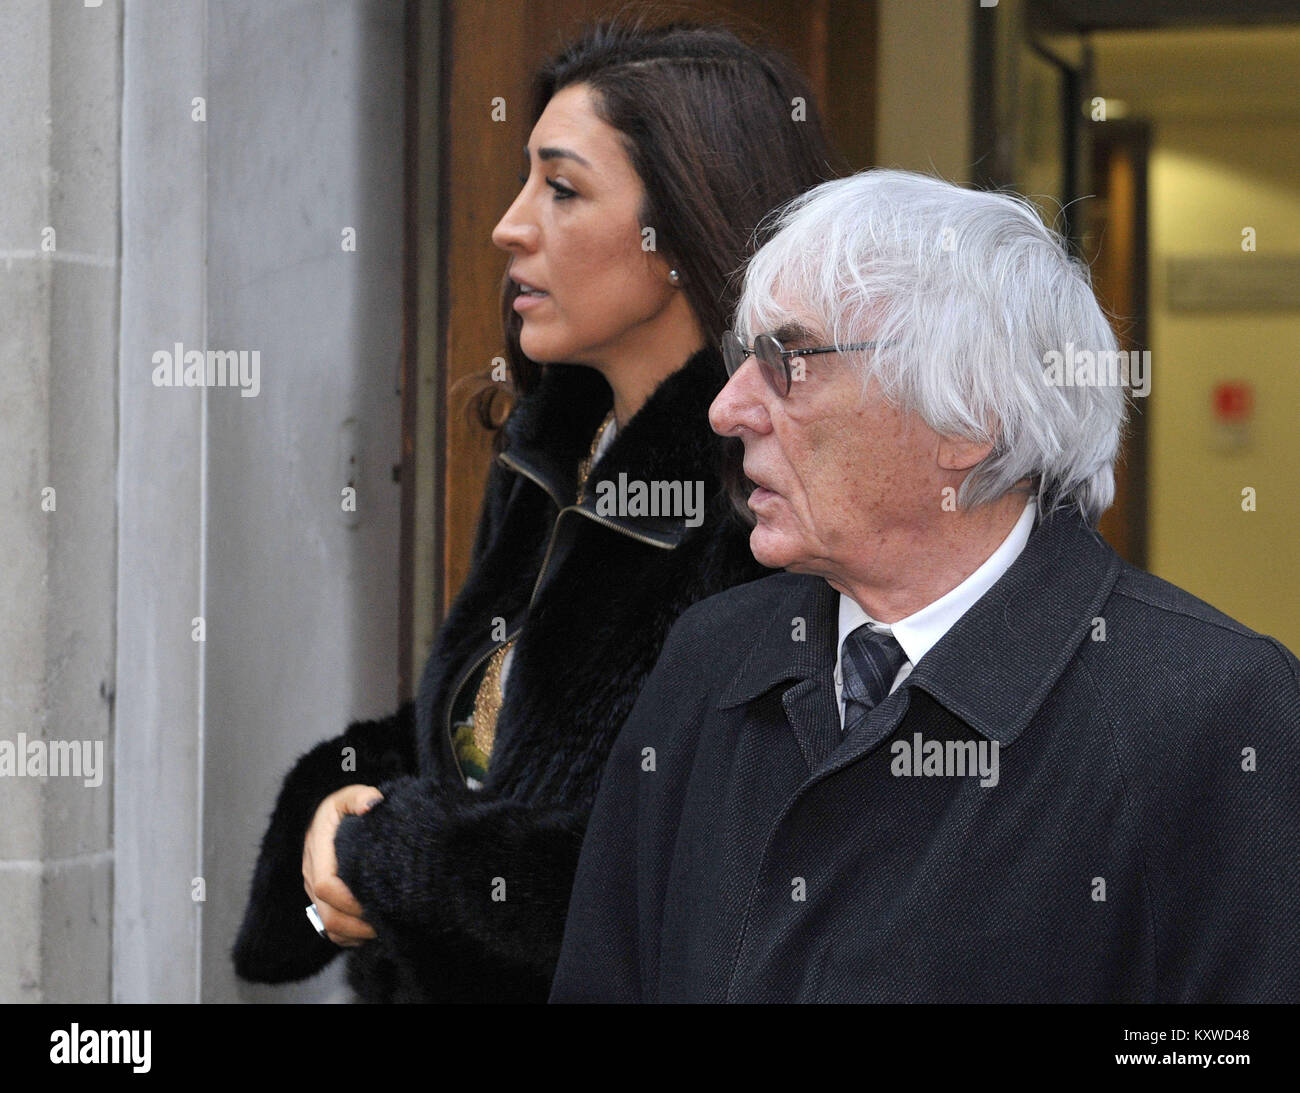 Tycoon Bernie Ecclestone and his wife Fabiana Flosi leaving London's Central Family Court, where his daughter Petra Ecclestone had the latest hearing in her divorce battle with ex-husband James Stunt. Stock Photo